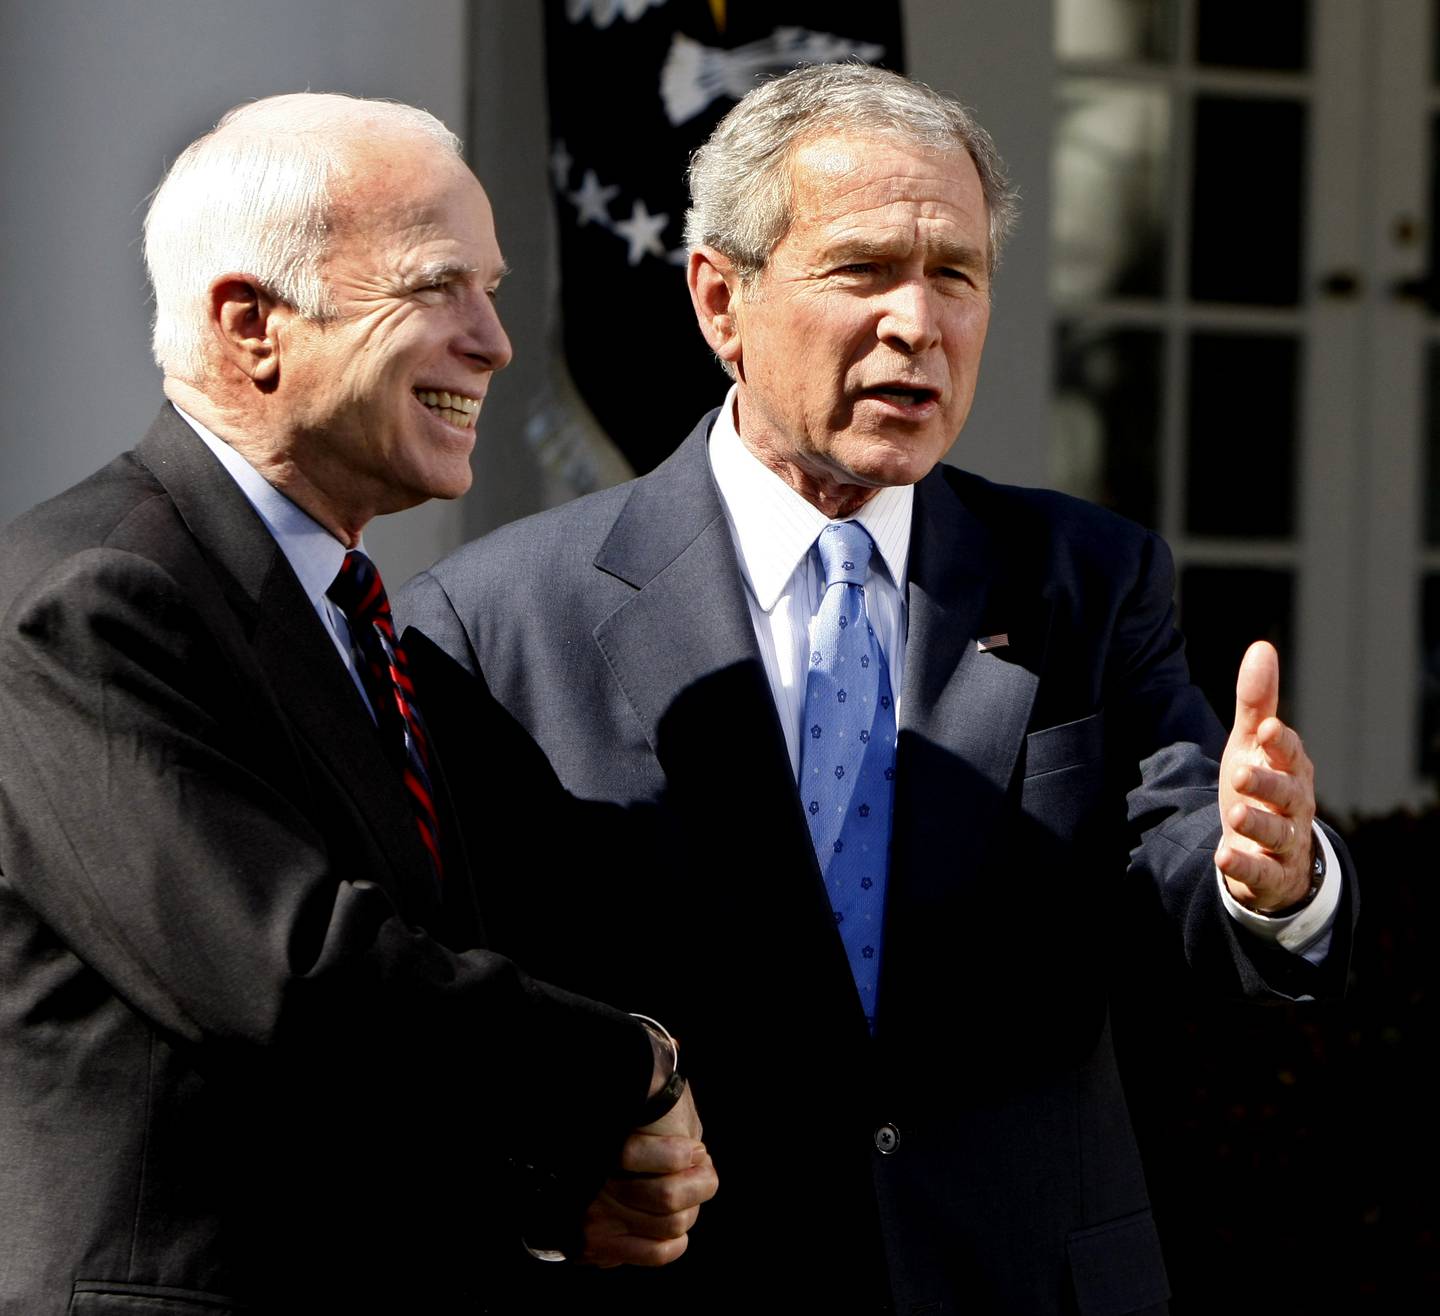 FILE - In this March 5, 2008 file photo, President George W. Bush and Republican nominee-in-waiting, Sen. John McCain, R-Ariz., shake hands in the Rose Garden of the White House in Washington. Expect Bush to stay far away from this year's presidential election. Mitt Romney's campaign doesn't foresee the 43rd president playing any substantive role in the race over the next six months and the GOP candidate's aides are carefully weighing how much the former president should be involved in this summer's GOP convention _ and for good reason. The Bush fatigue that was a drag on GOP nominee John McCain four years ago clearly still lingers, even among Republicans.  (AP Photo/Gerald Herbert, File)